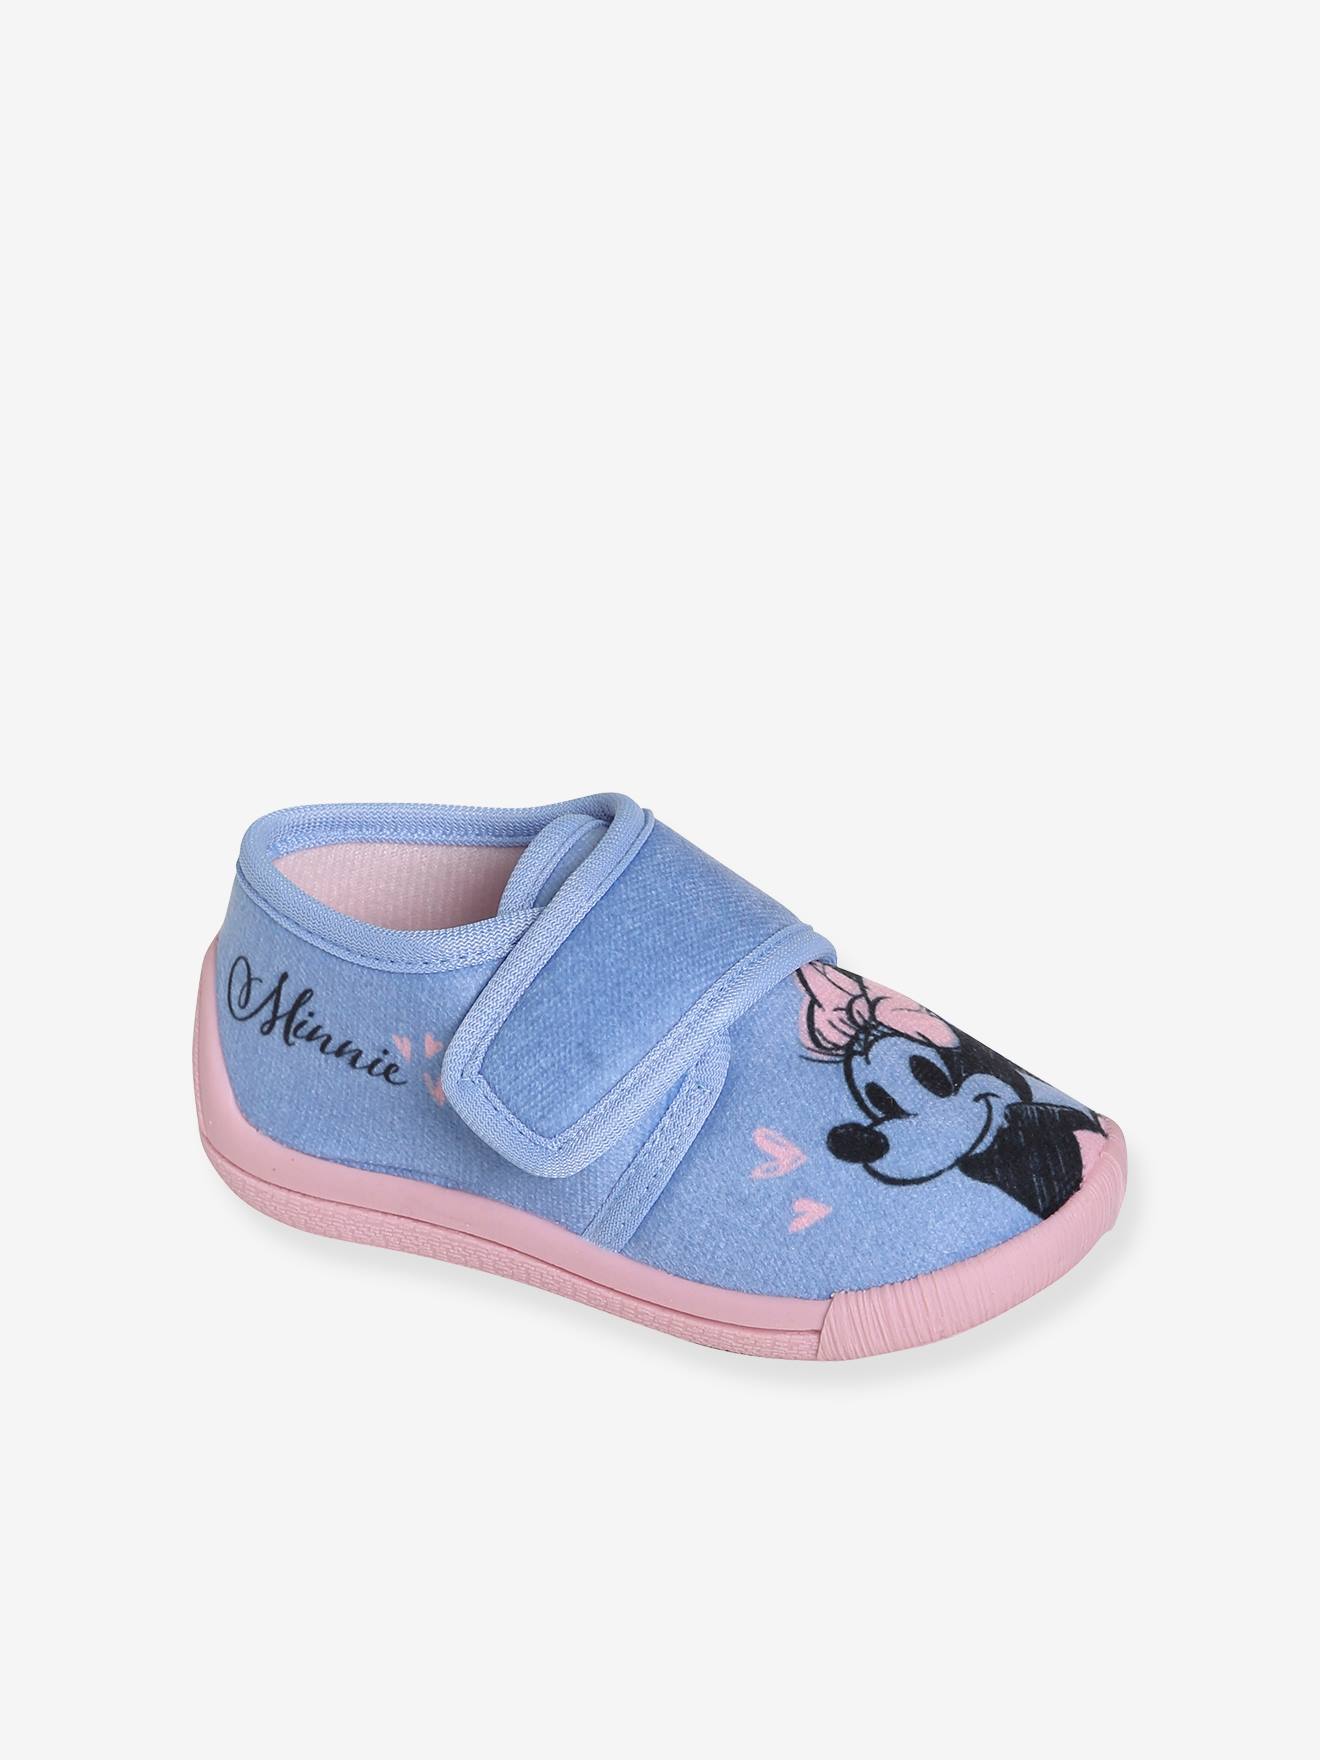 Disney® Shoes, for Children - blue medium solid with design, Shoes